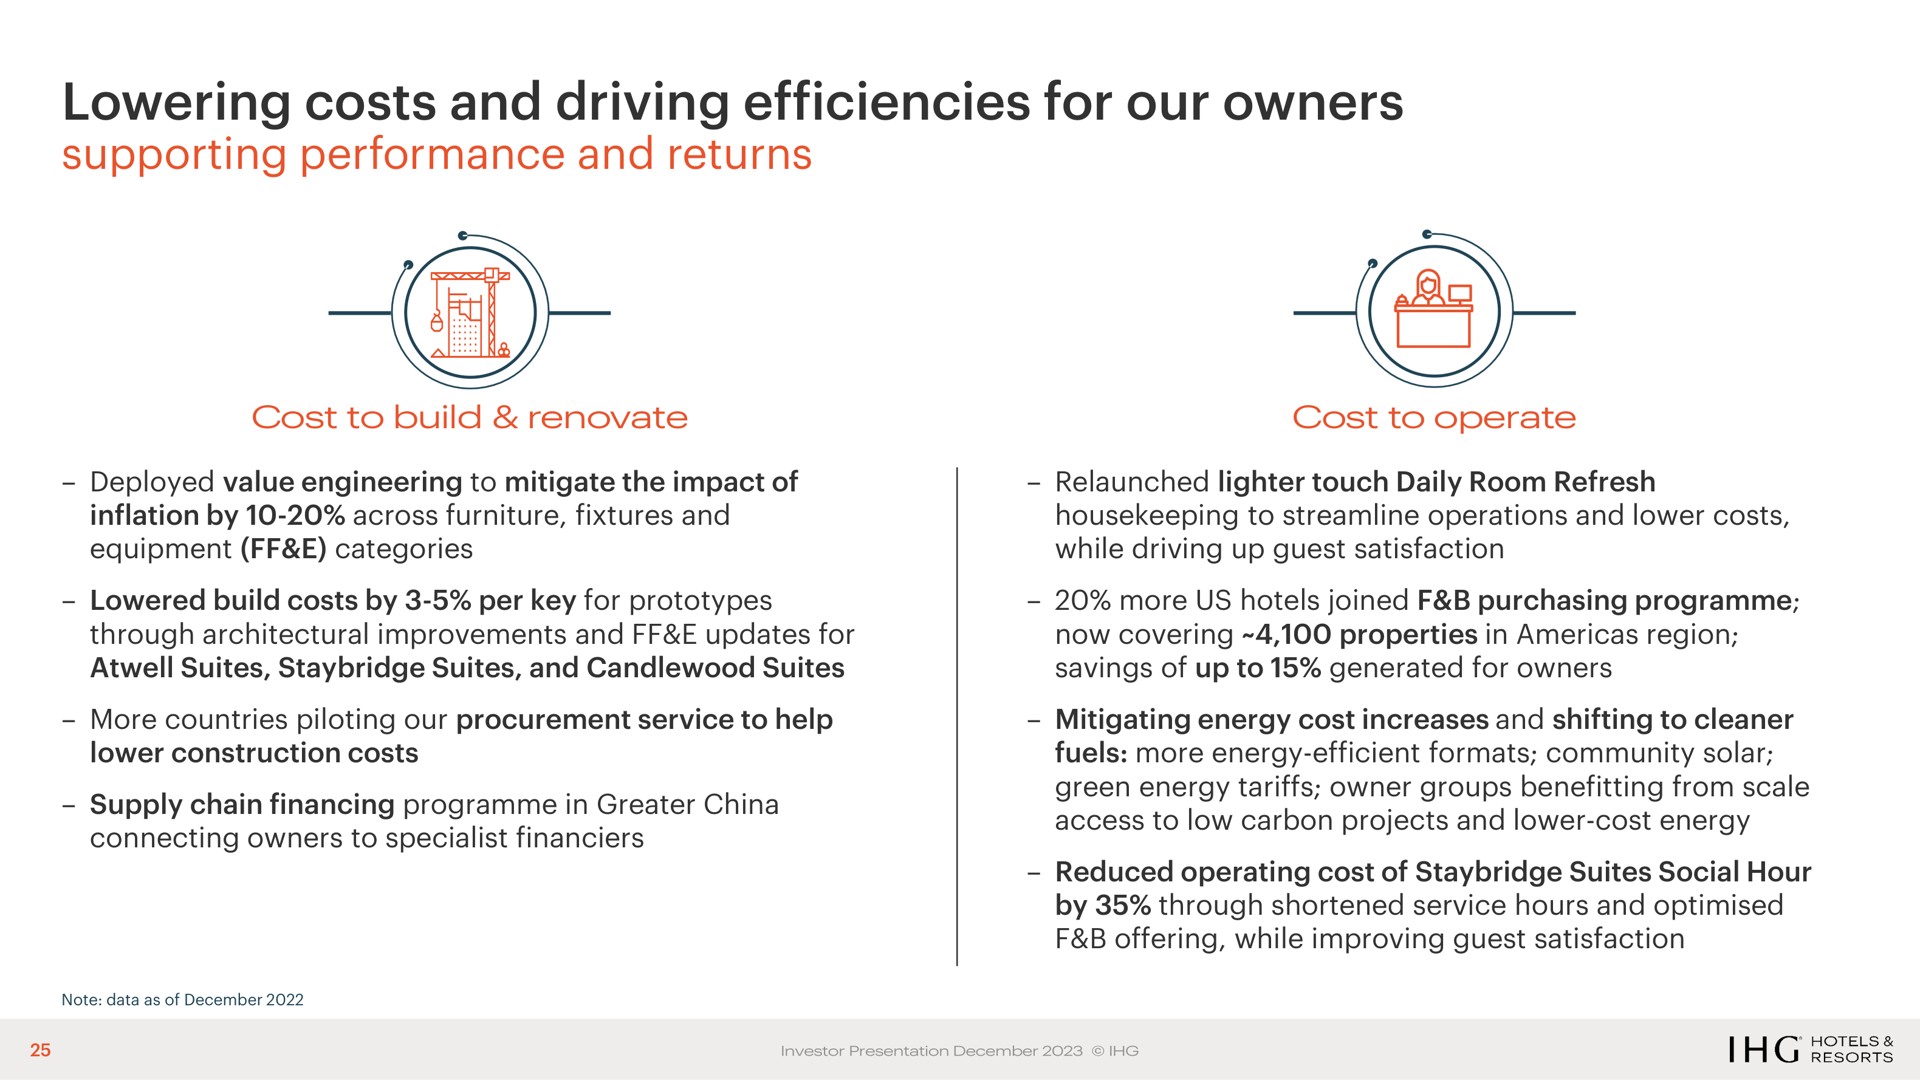 lowering costs and driving efficiencies for our owners supporting performance and returns | IHG Hotels